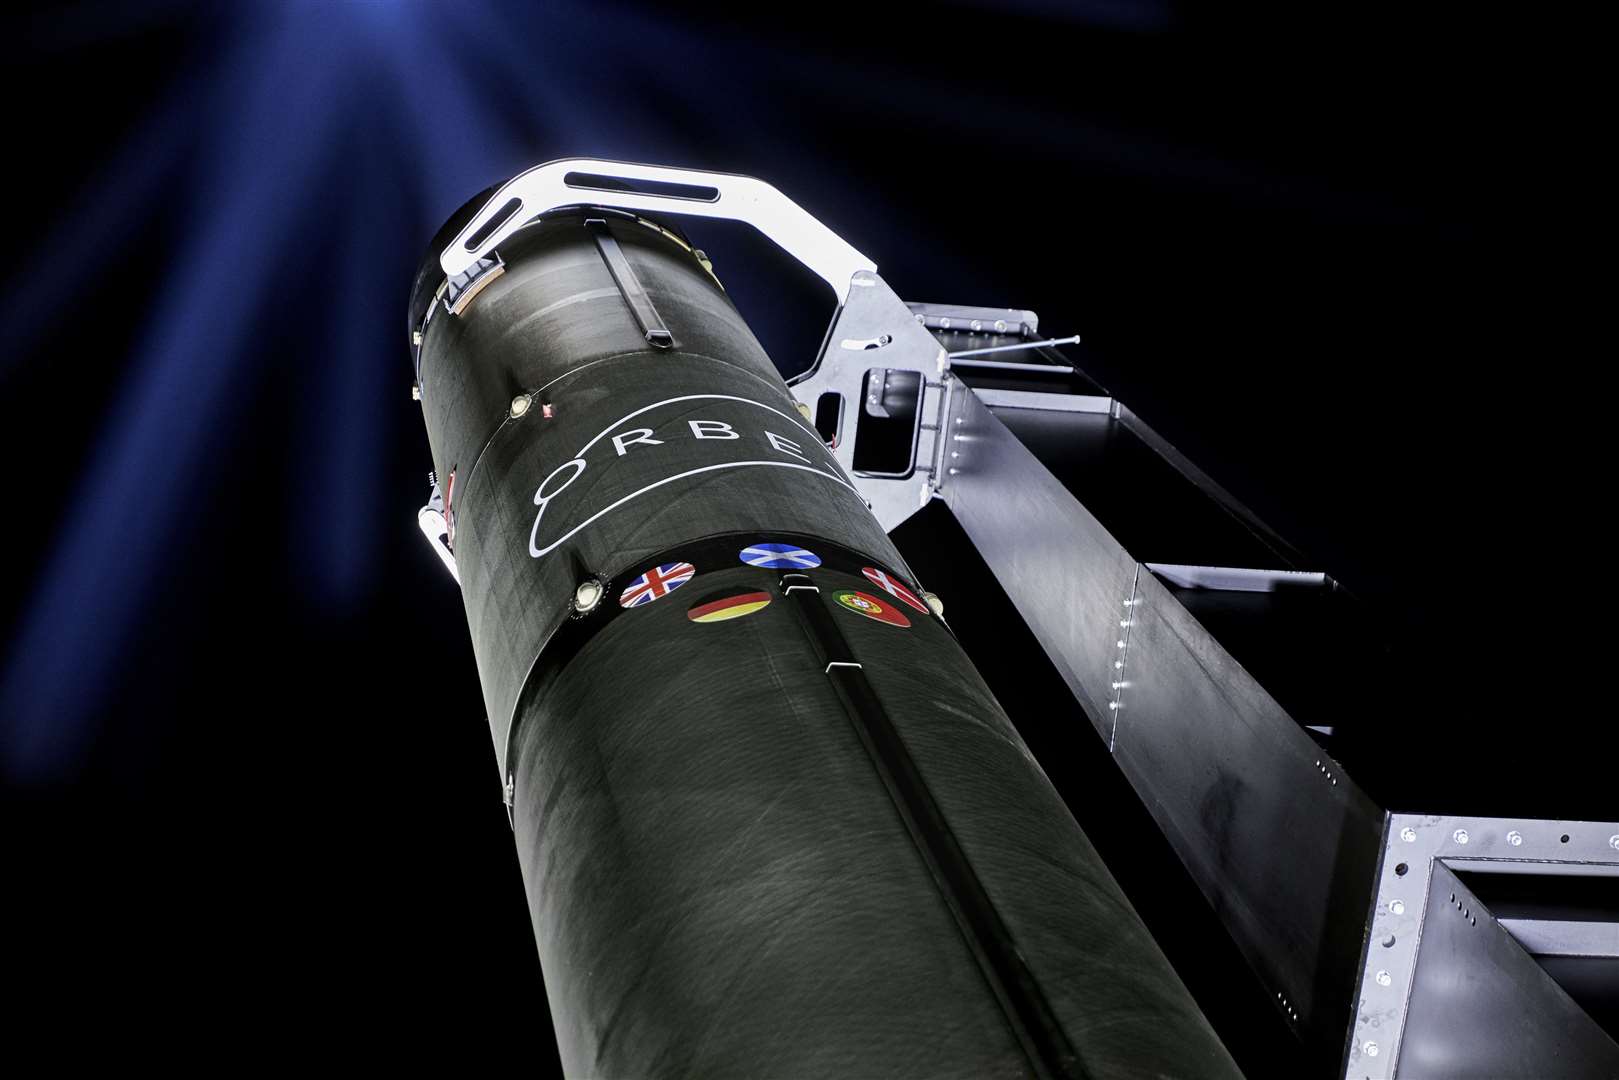 The prototype Prime rocket is unveiled. Picture: Orbex